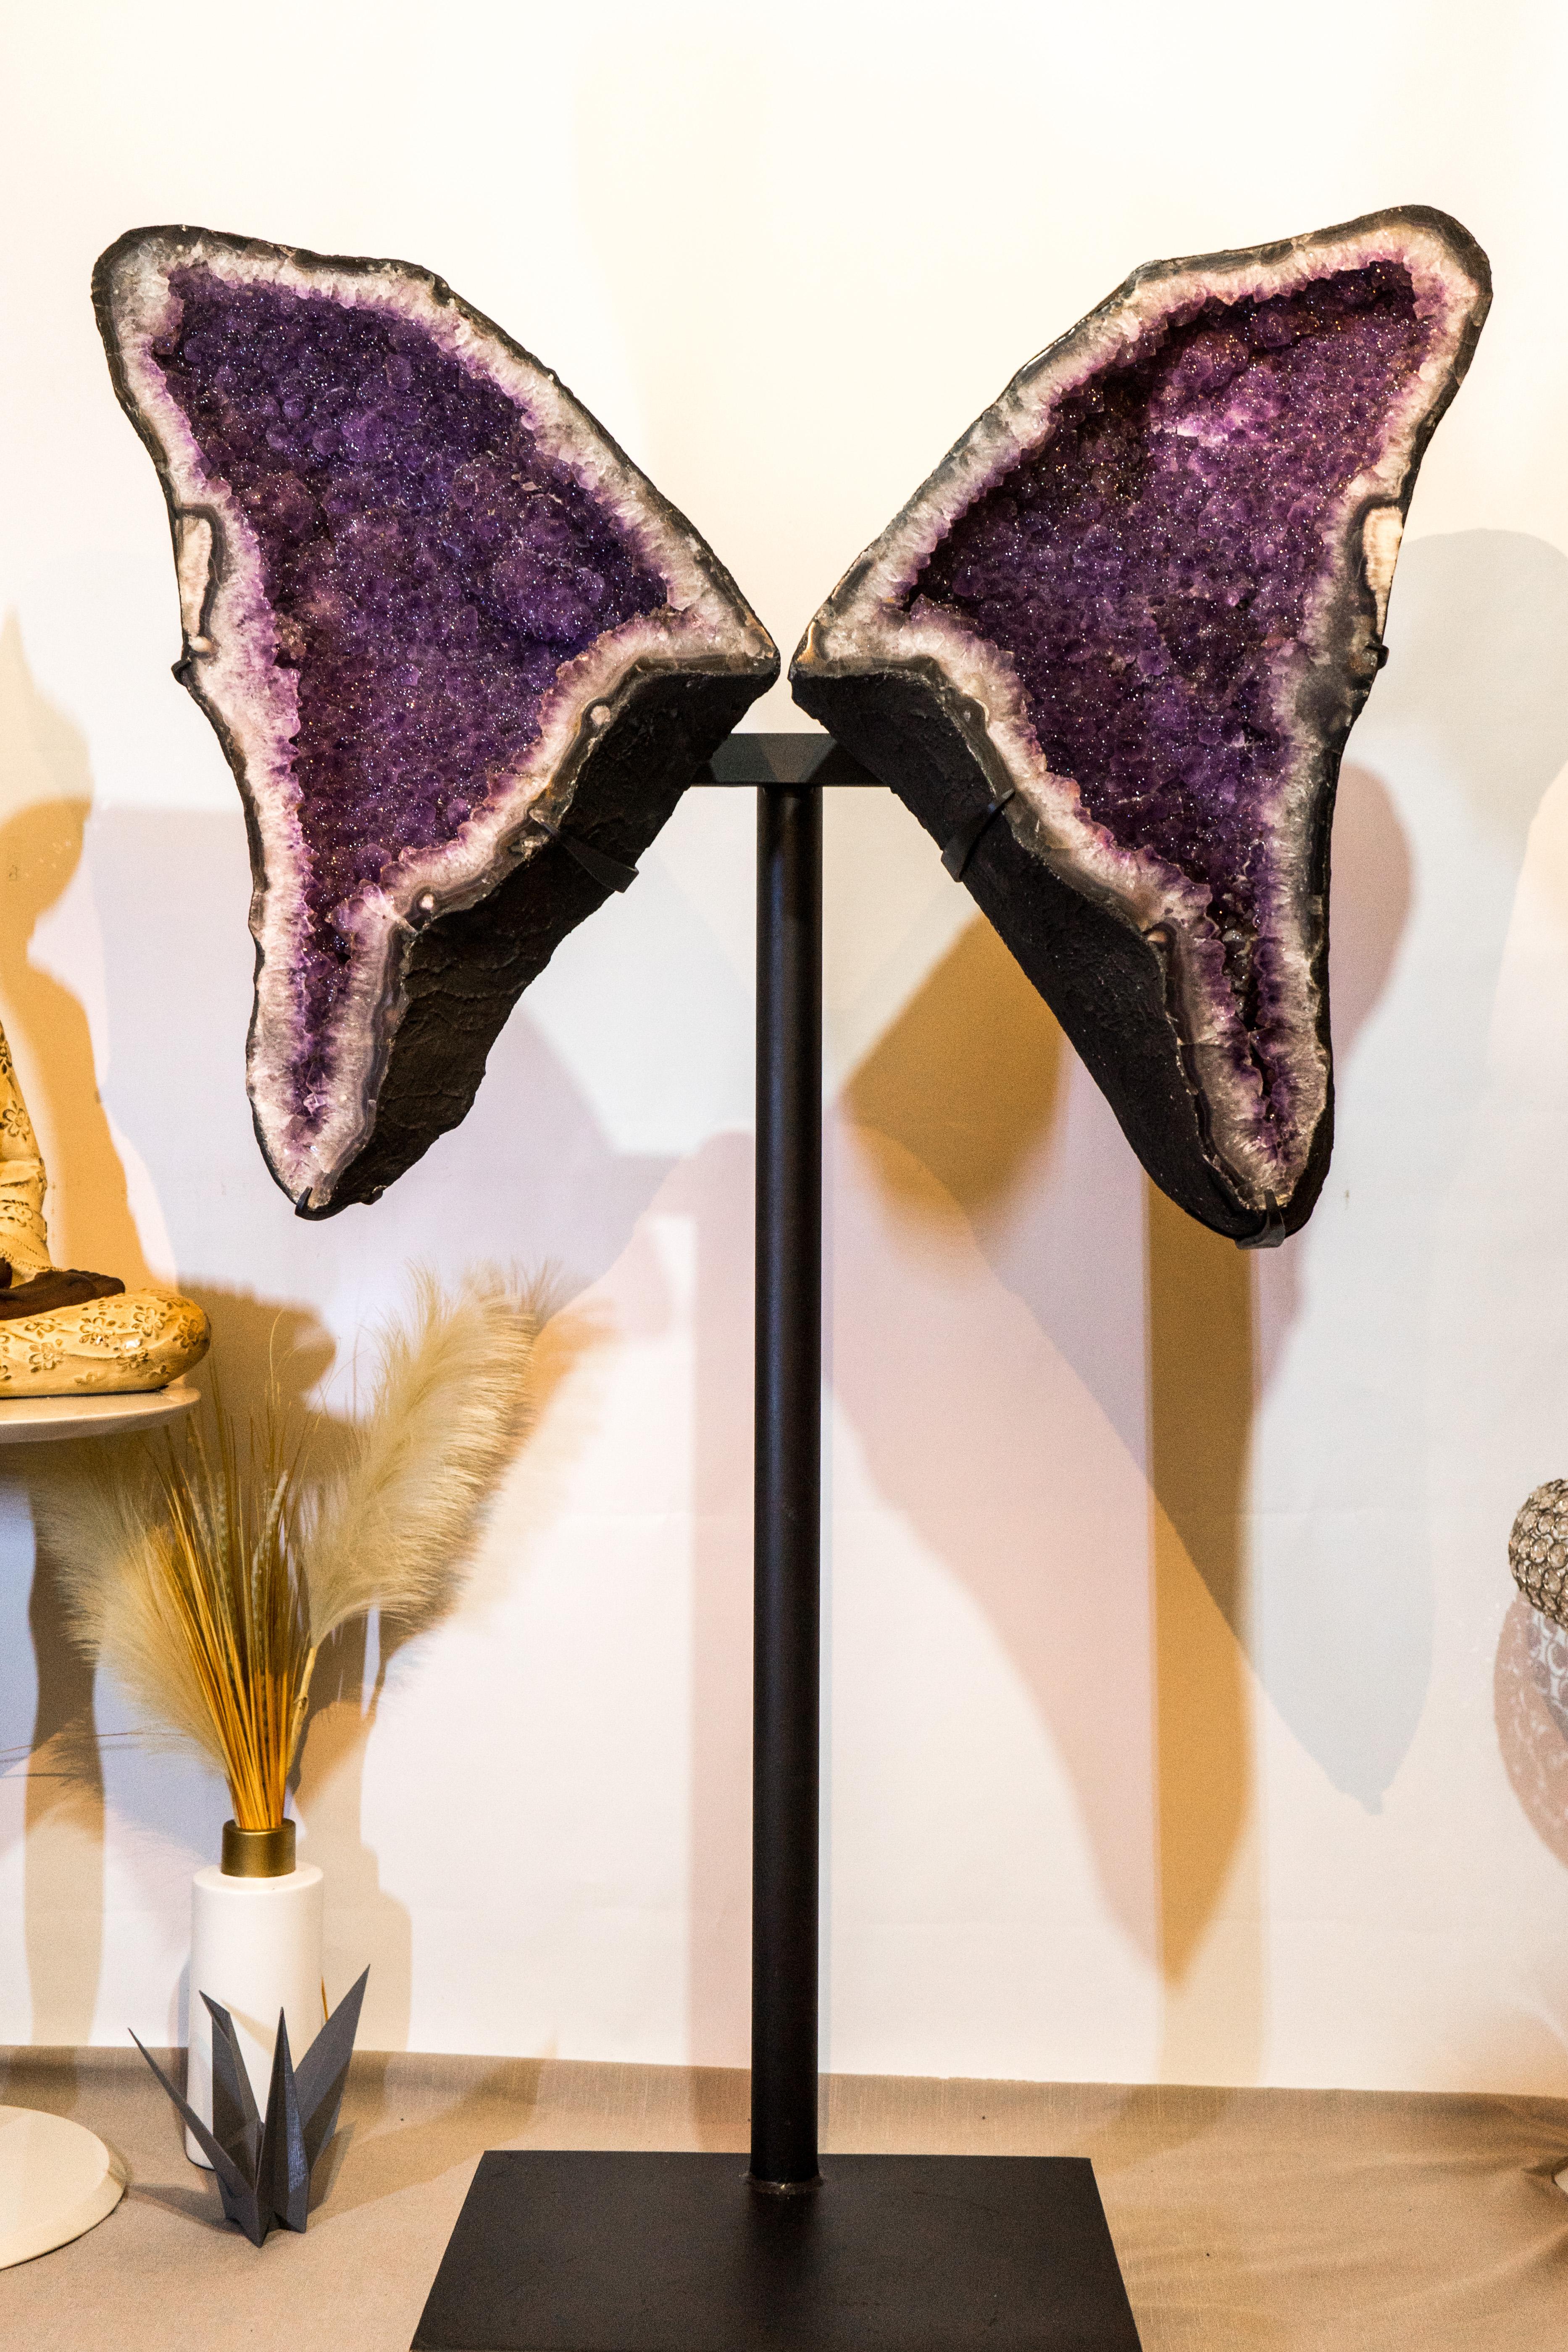 Gallery Grade Purple Lavender Sugar Druzy Amethyst Geodes, Astonishingly Cut as Butterfly Angel Wings.

A pair of Amethyst Galaxy Druzy Geodes (also known as Sugar Coat Amethyst) that is unlike anything you've ever seen. This exquisite butterfly